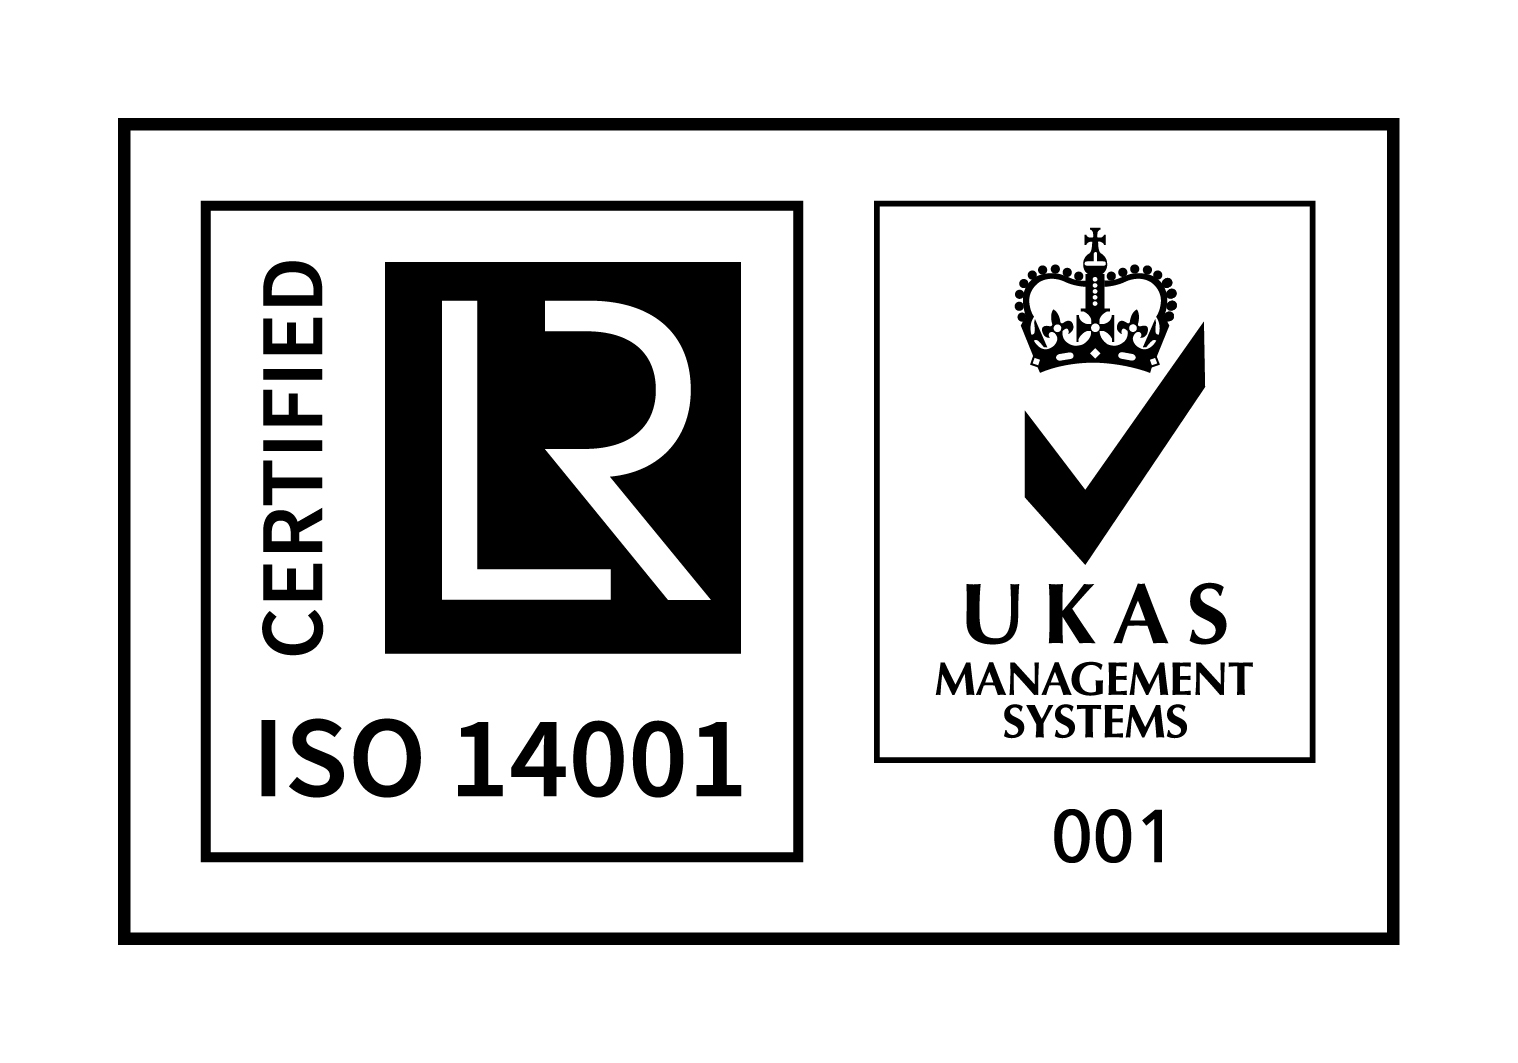 UKAS Management Systems - ISO 14001